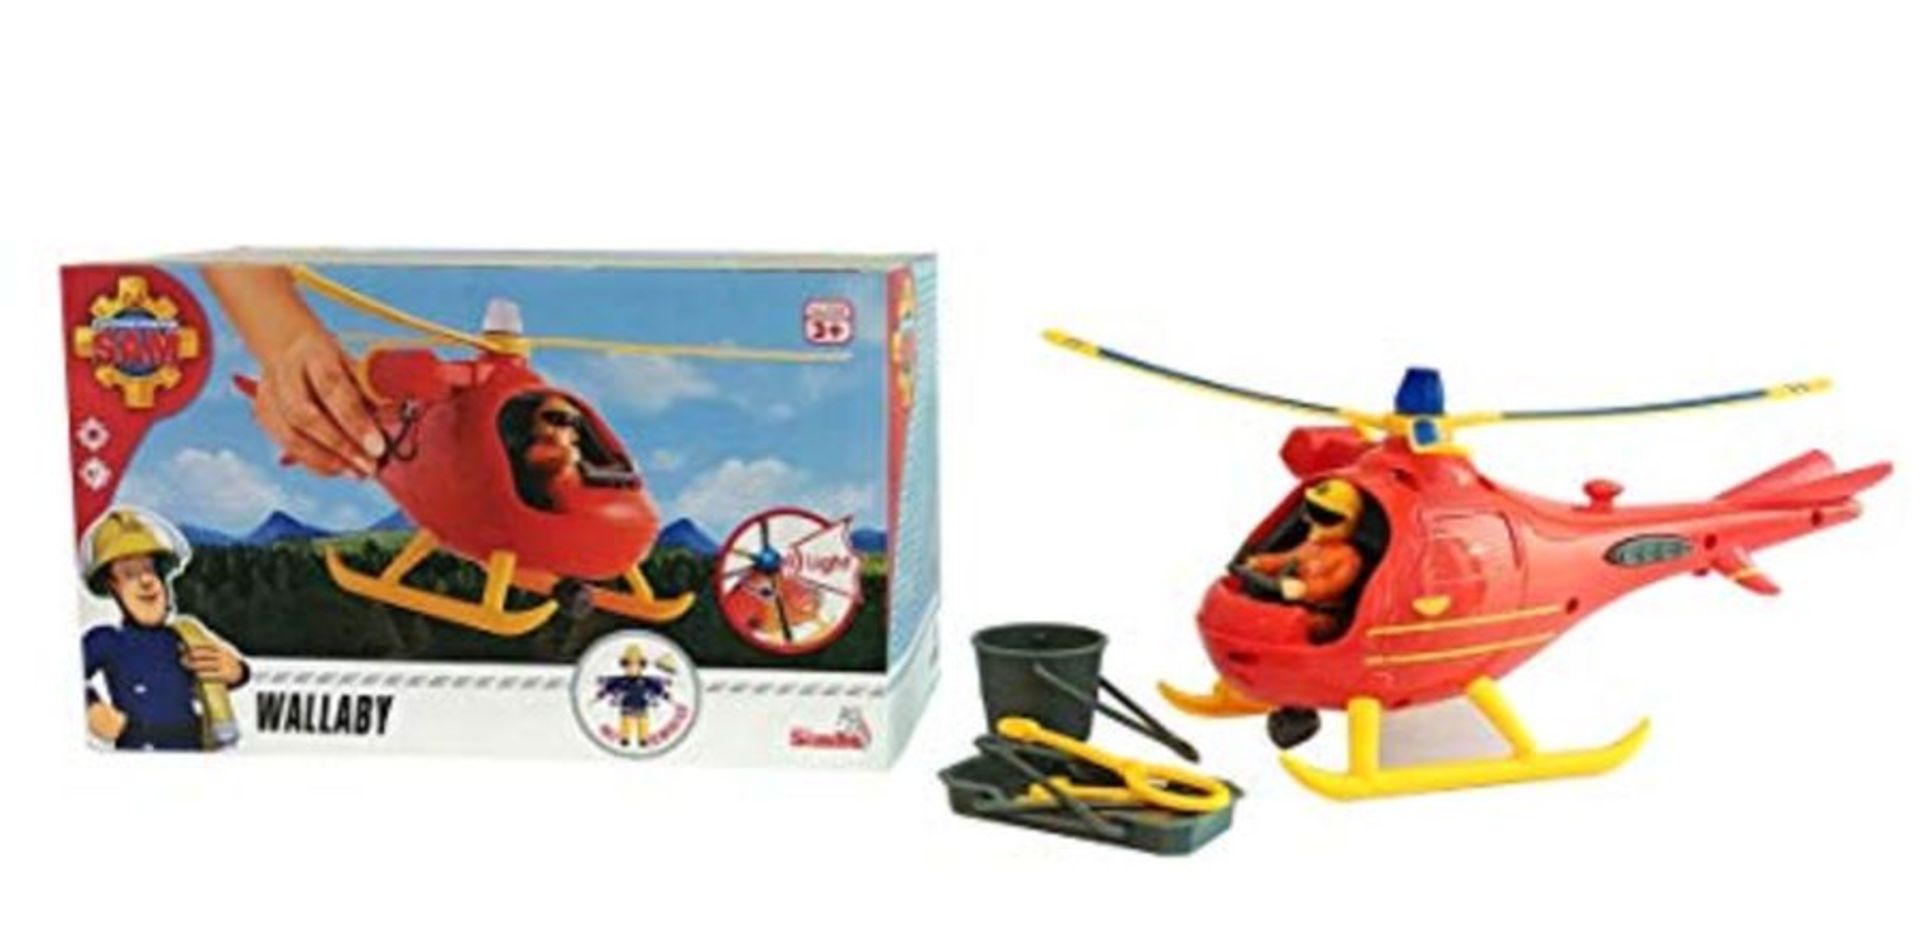 Simba 109251077038 Sam The Firefighter Wallaby Helicopter with Character Tom, 3 Years